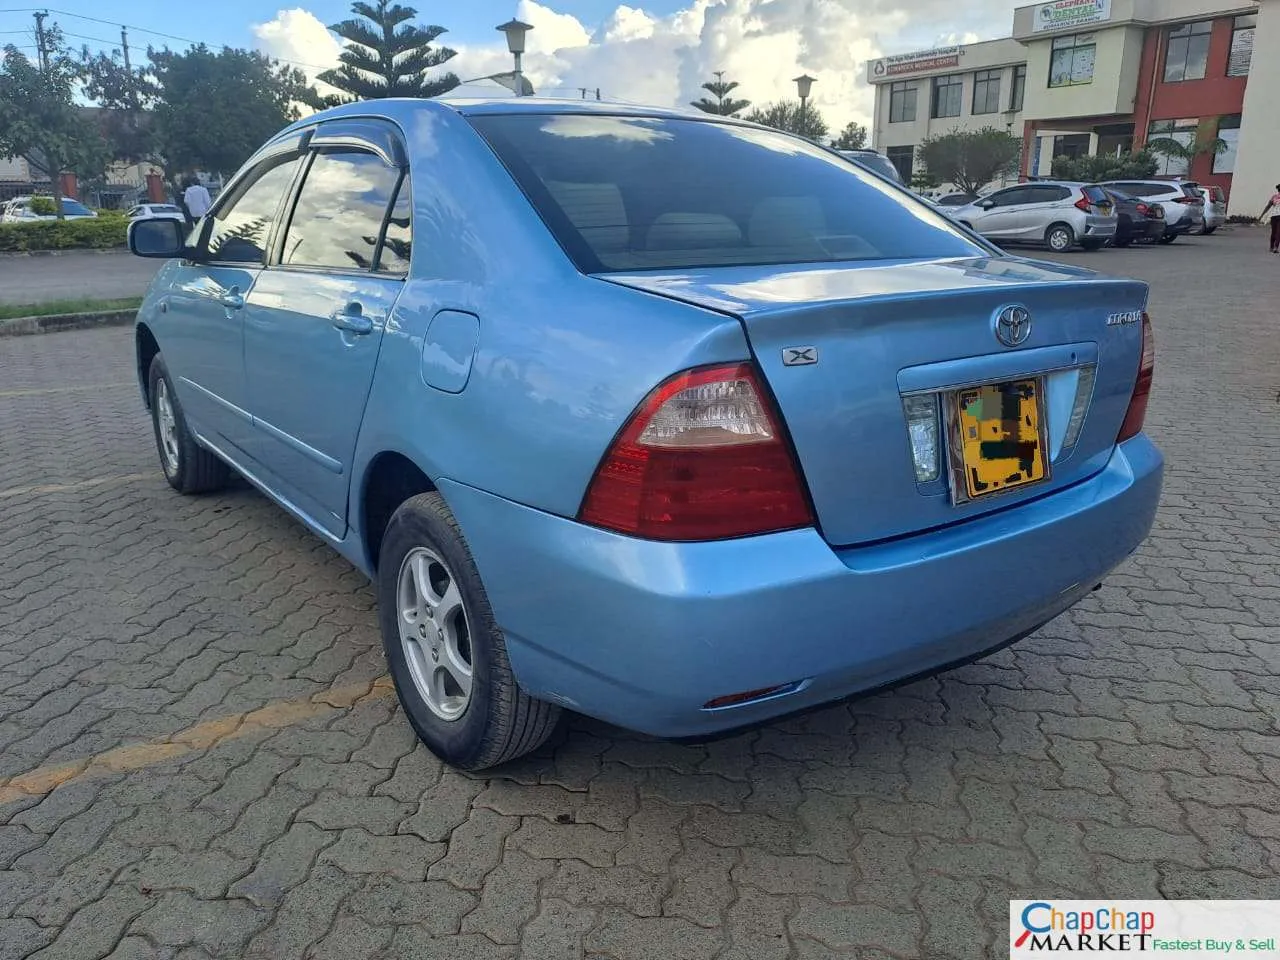 Toyota Corolla NZE mataa kwa boot QUICK SALE You Pay 30% Deposit Trade in OK hire purchase installments